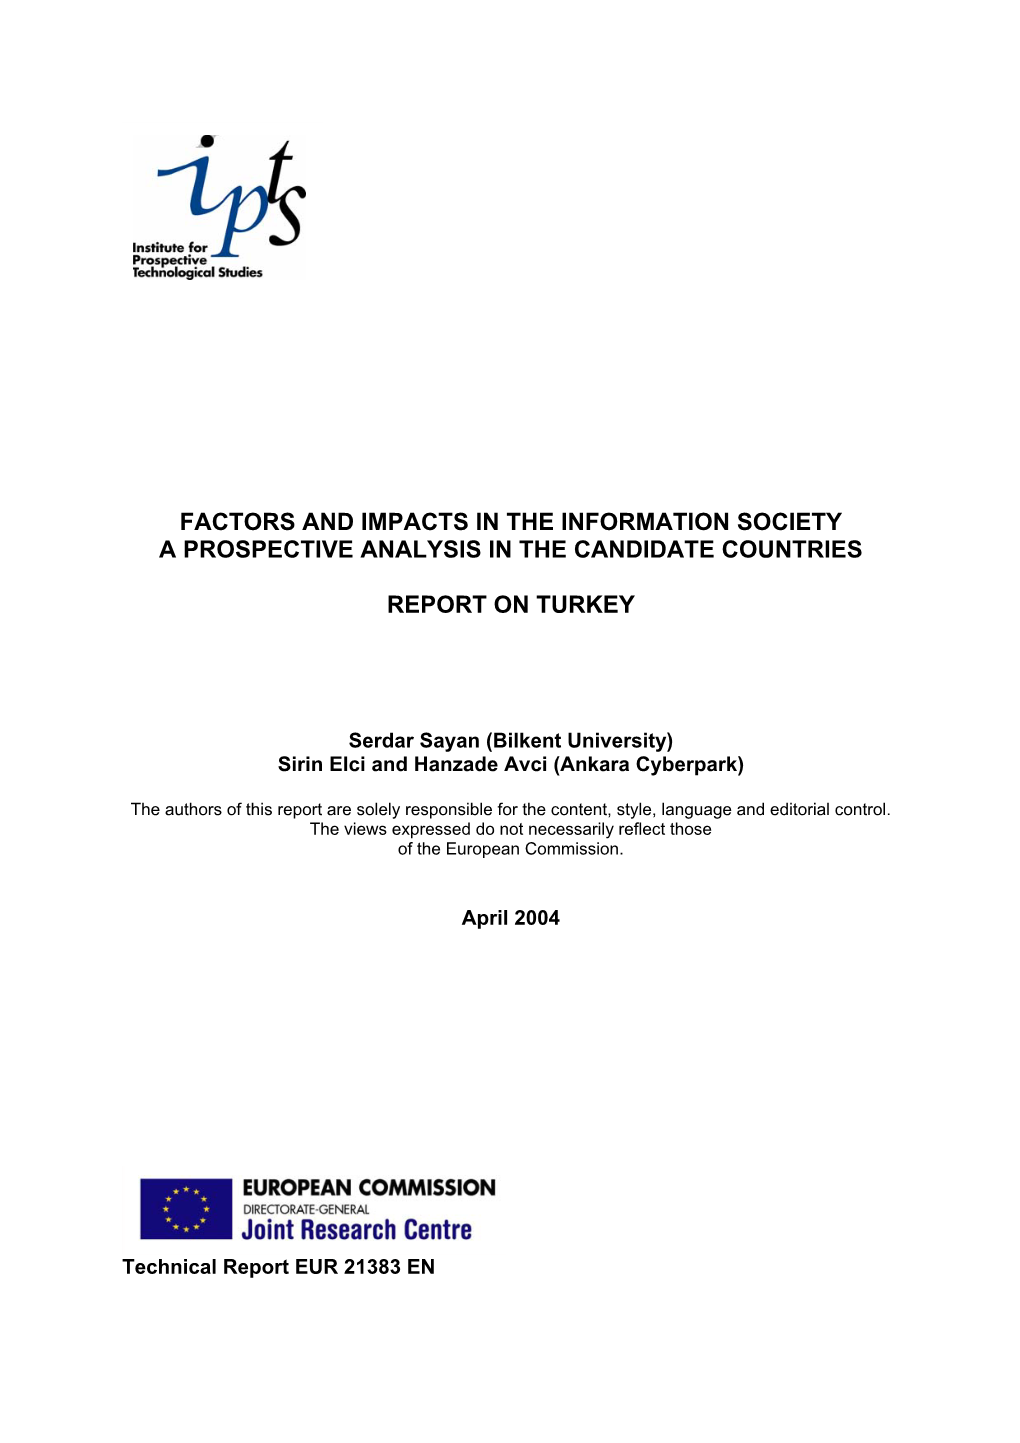 Factors and Impacts in the Information Society a Prospective Analysis in the Candidate Countries Report on Turkey